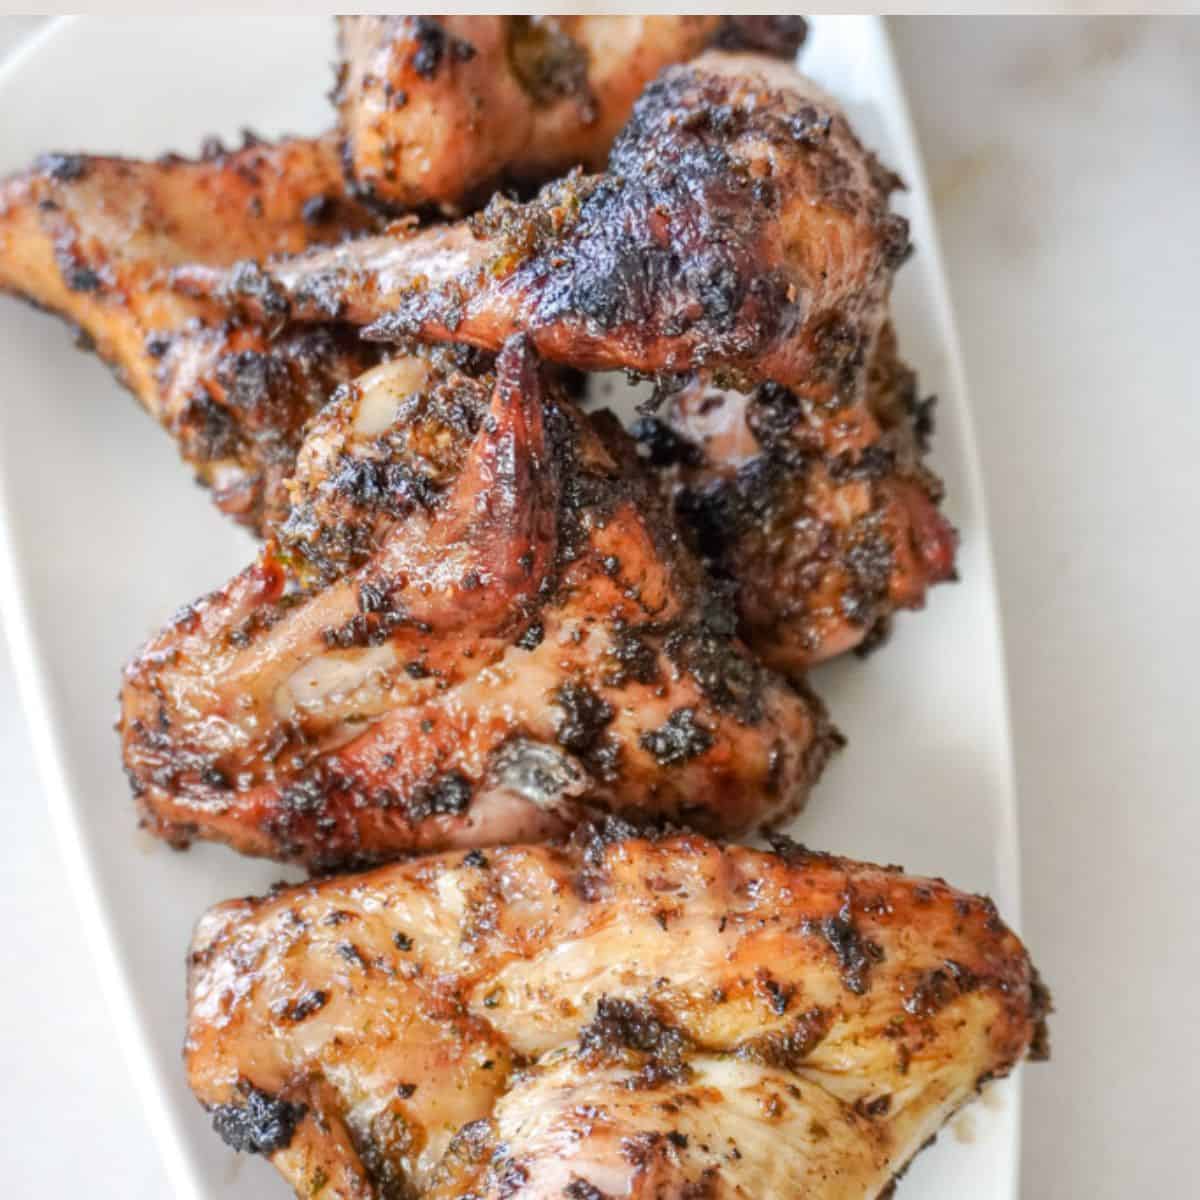 grilled chicken that is sitting on a white plate